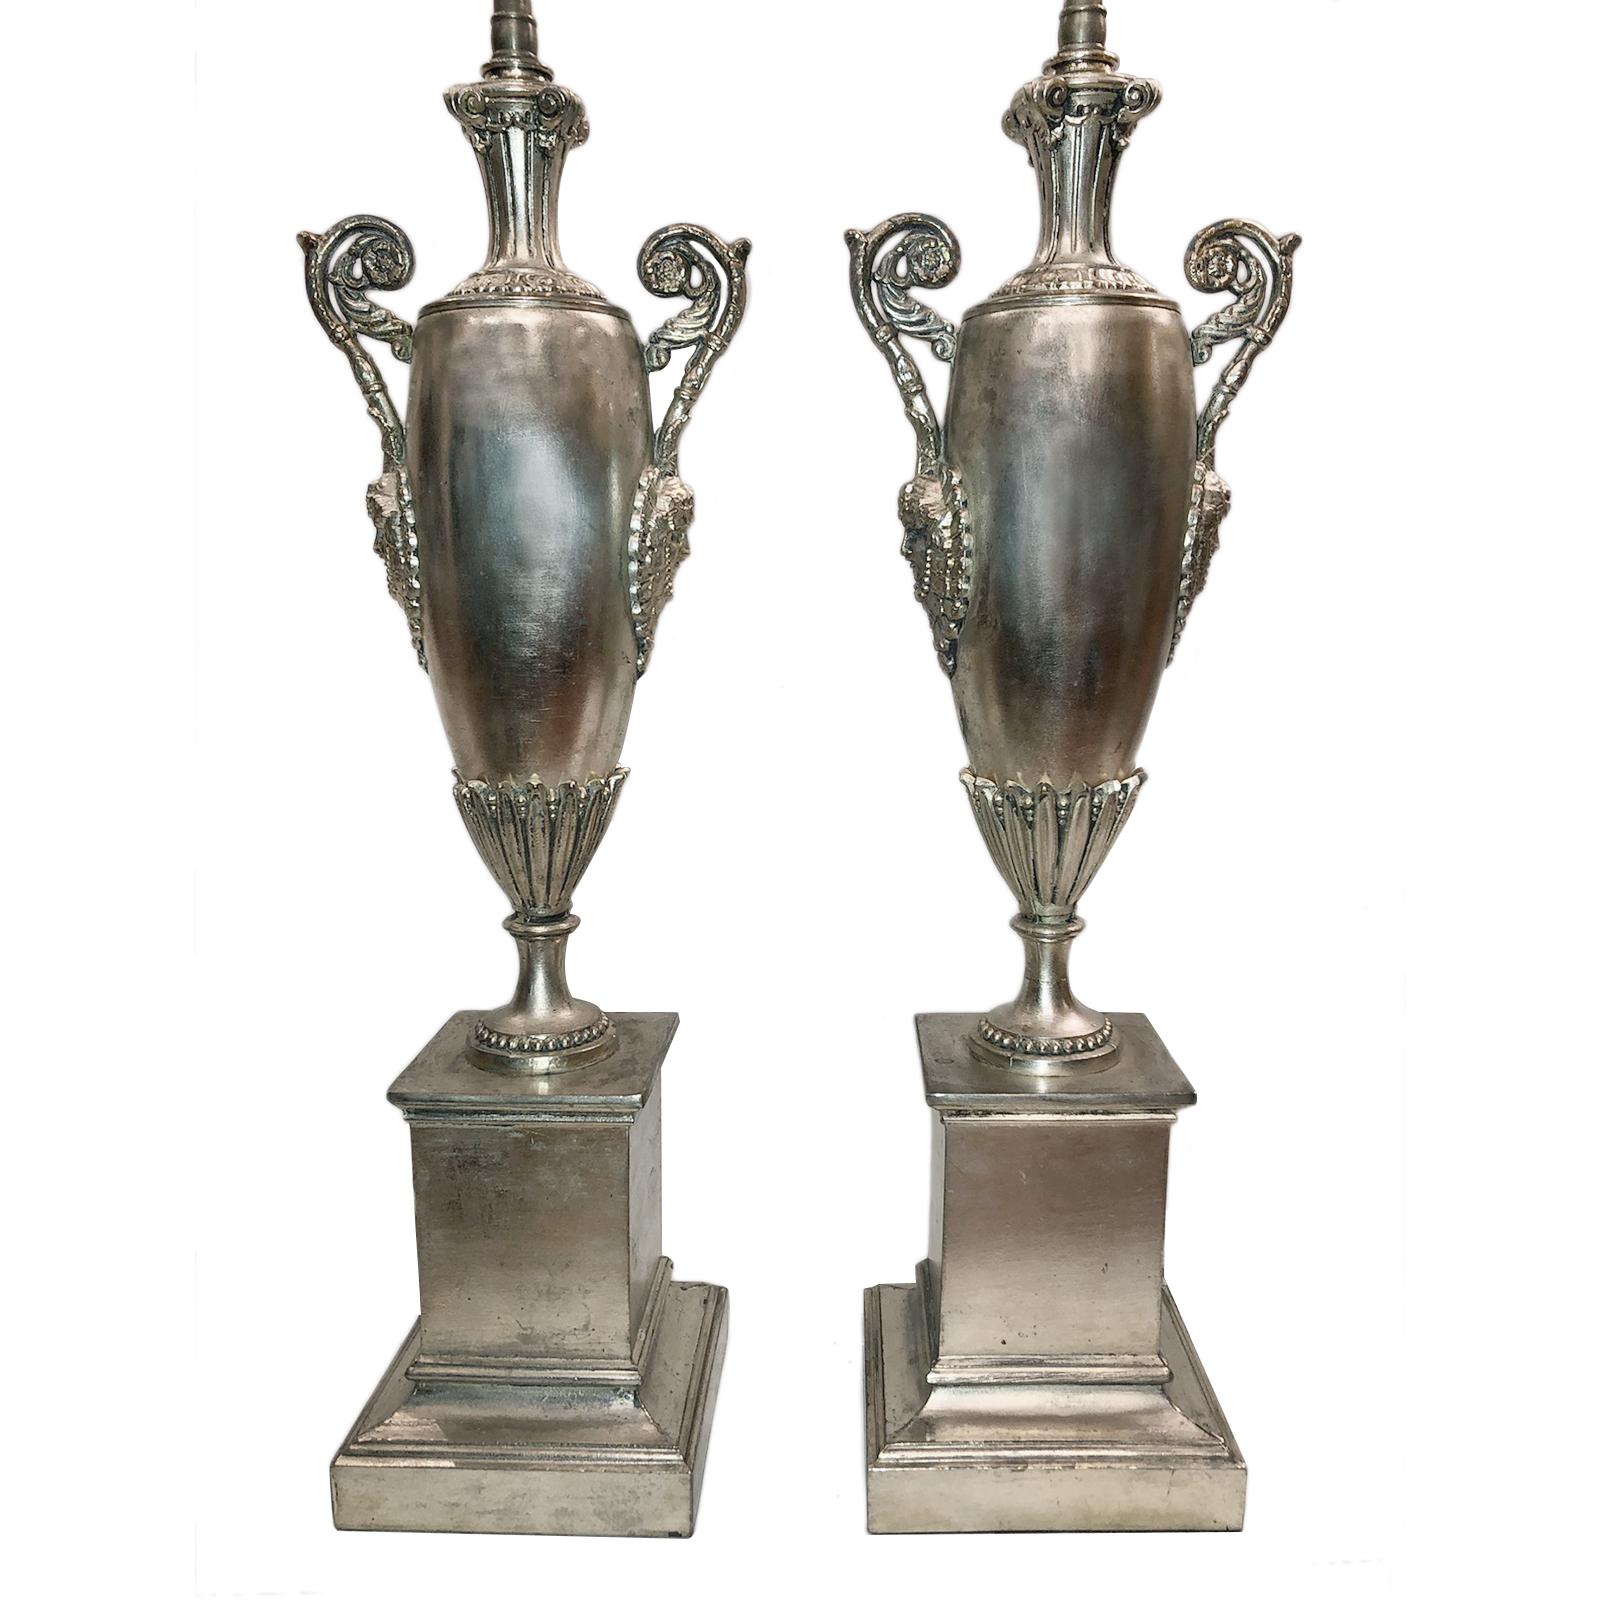 Pair of circa 1920s French silver plated Empire style urn-shaped table lamps with masks depicted on sides.

Measurements:
Height of body 20.5